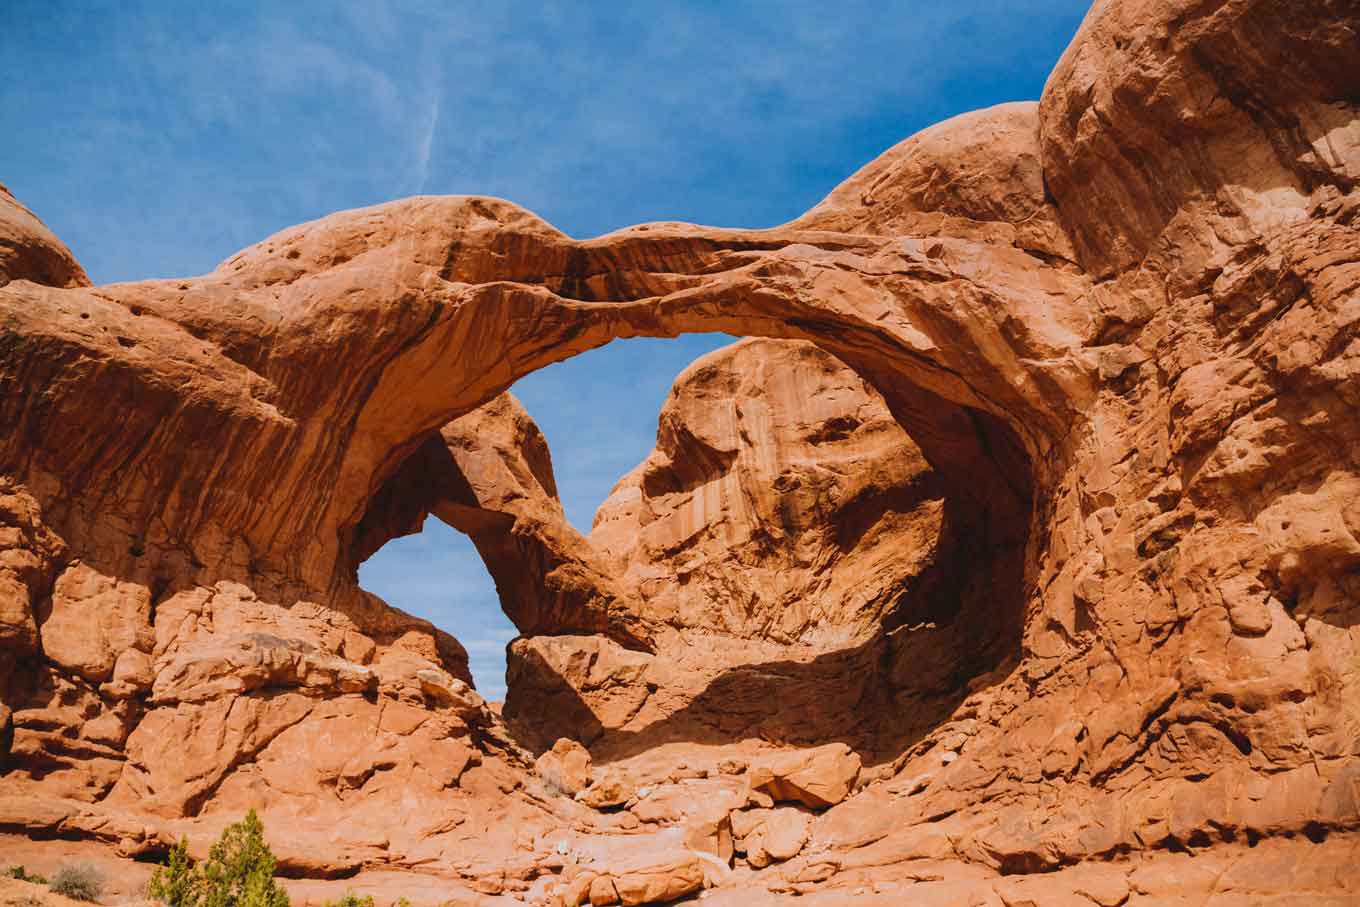 View from within Arches National Park